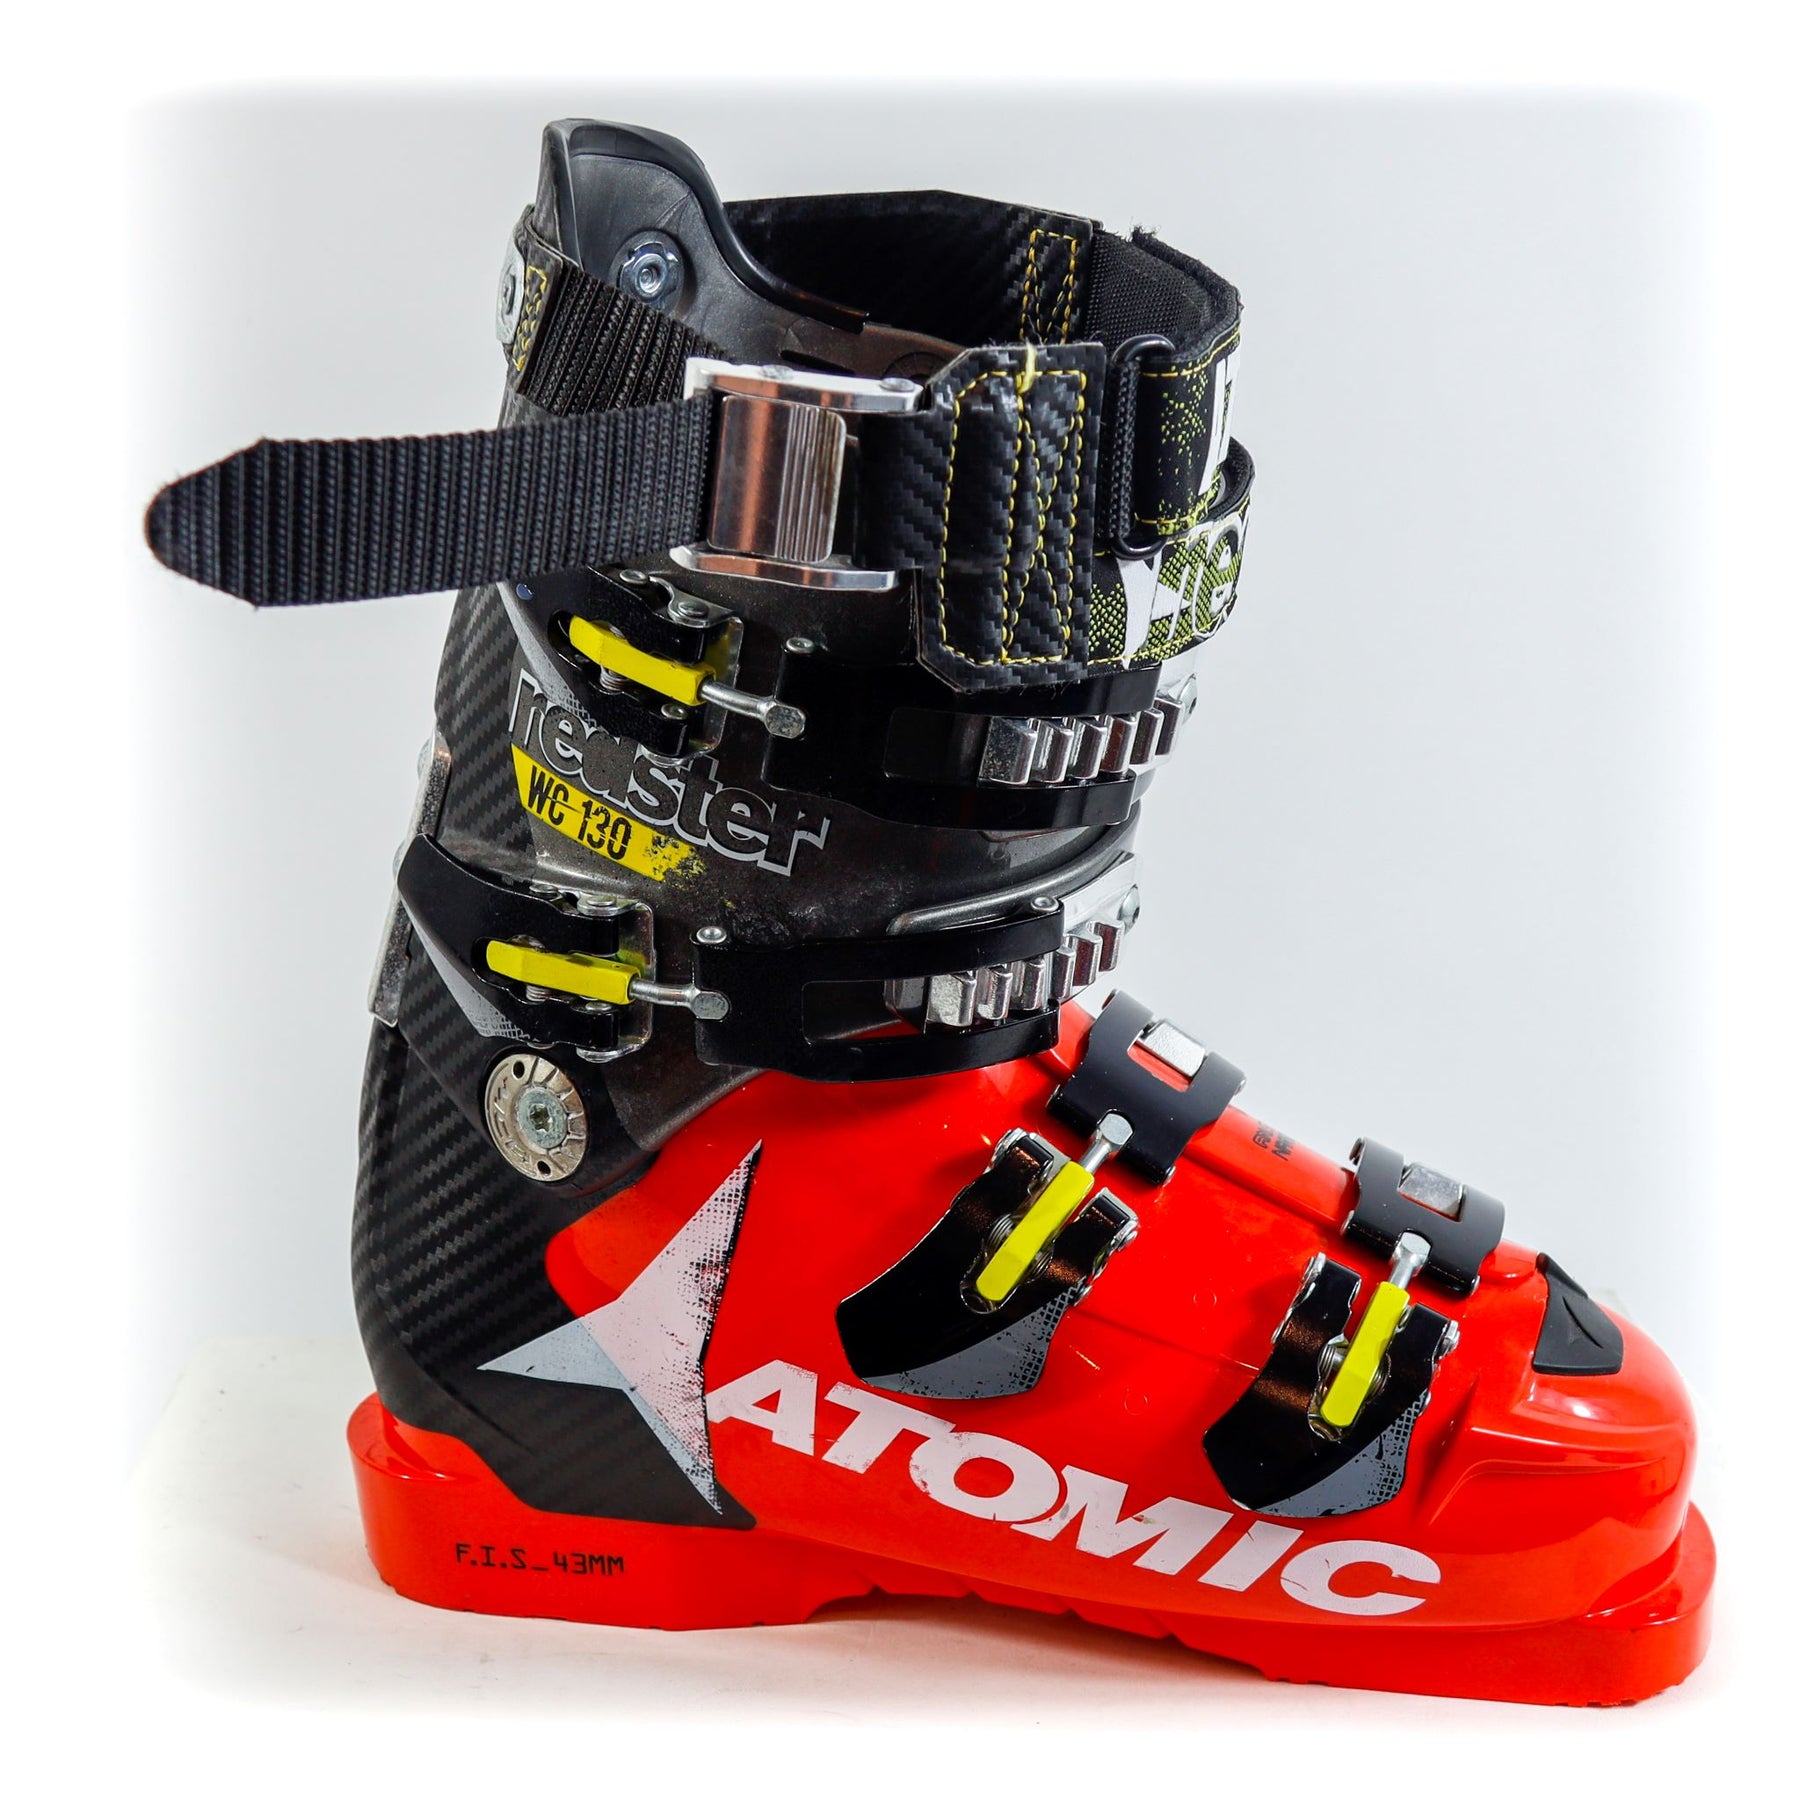 24.5 Atomic Redster WC 130 Men's 2014 Race Ski Boot Shells - USED